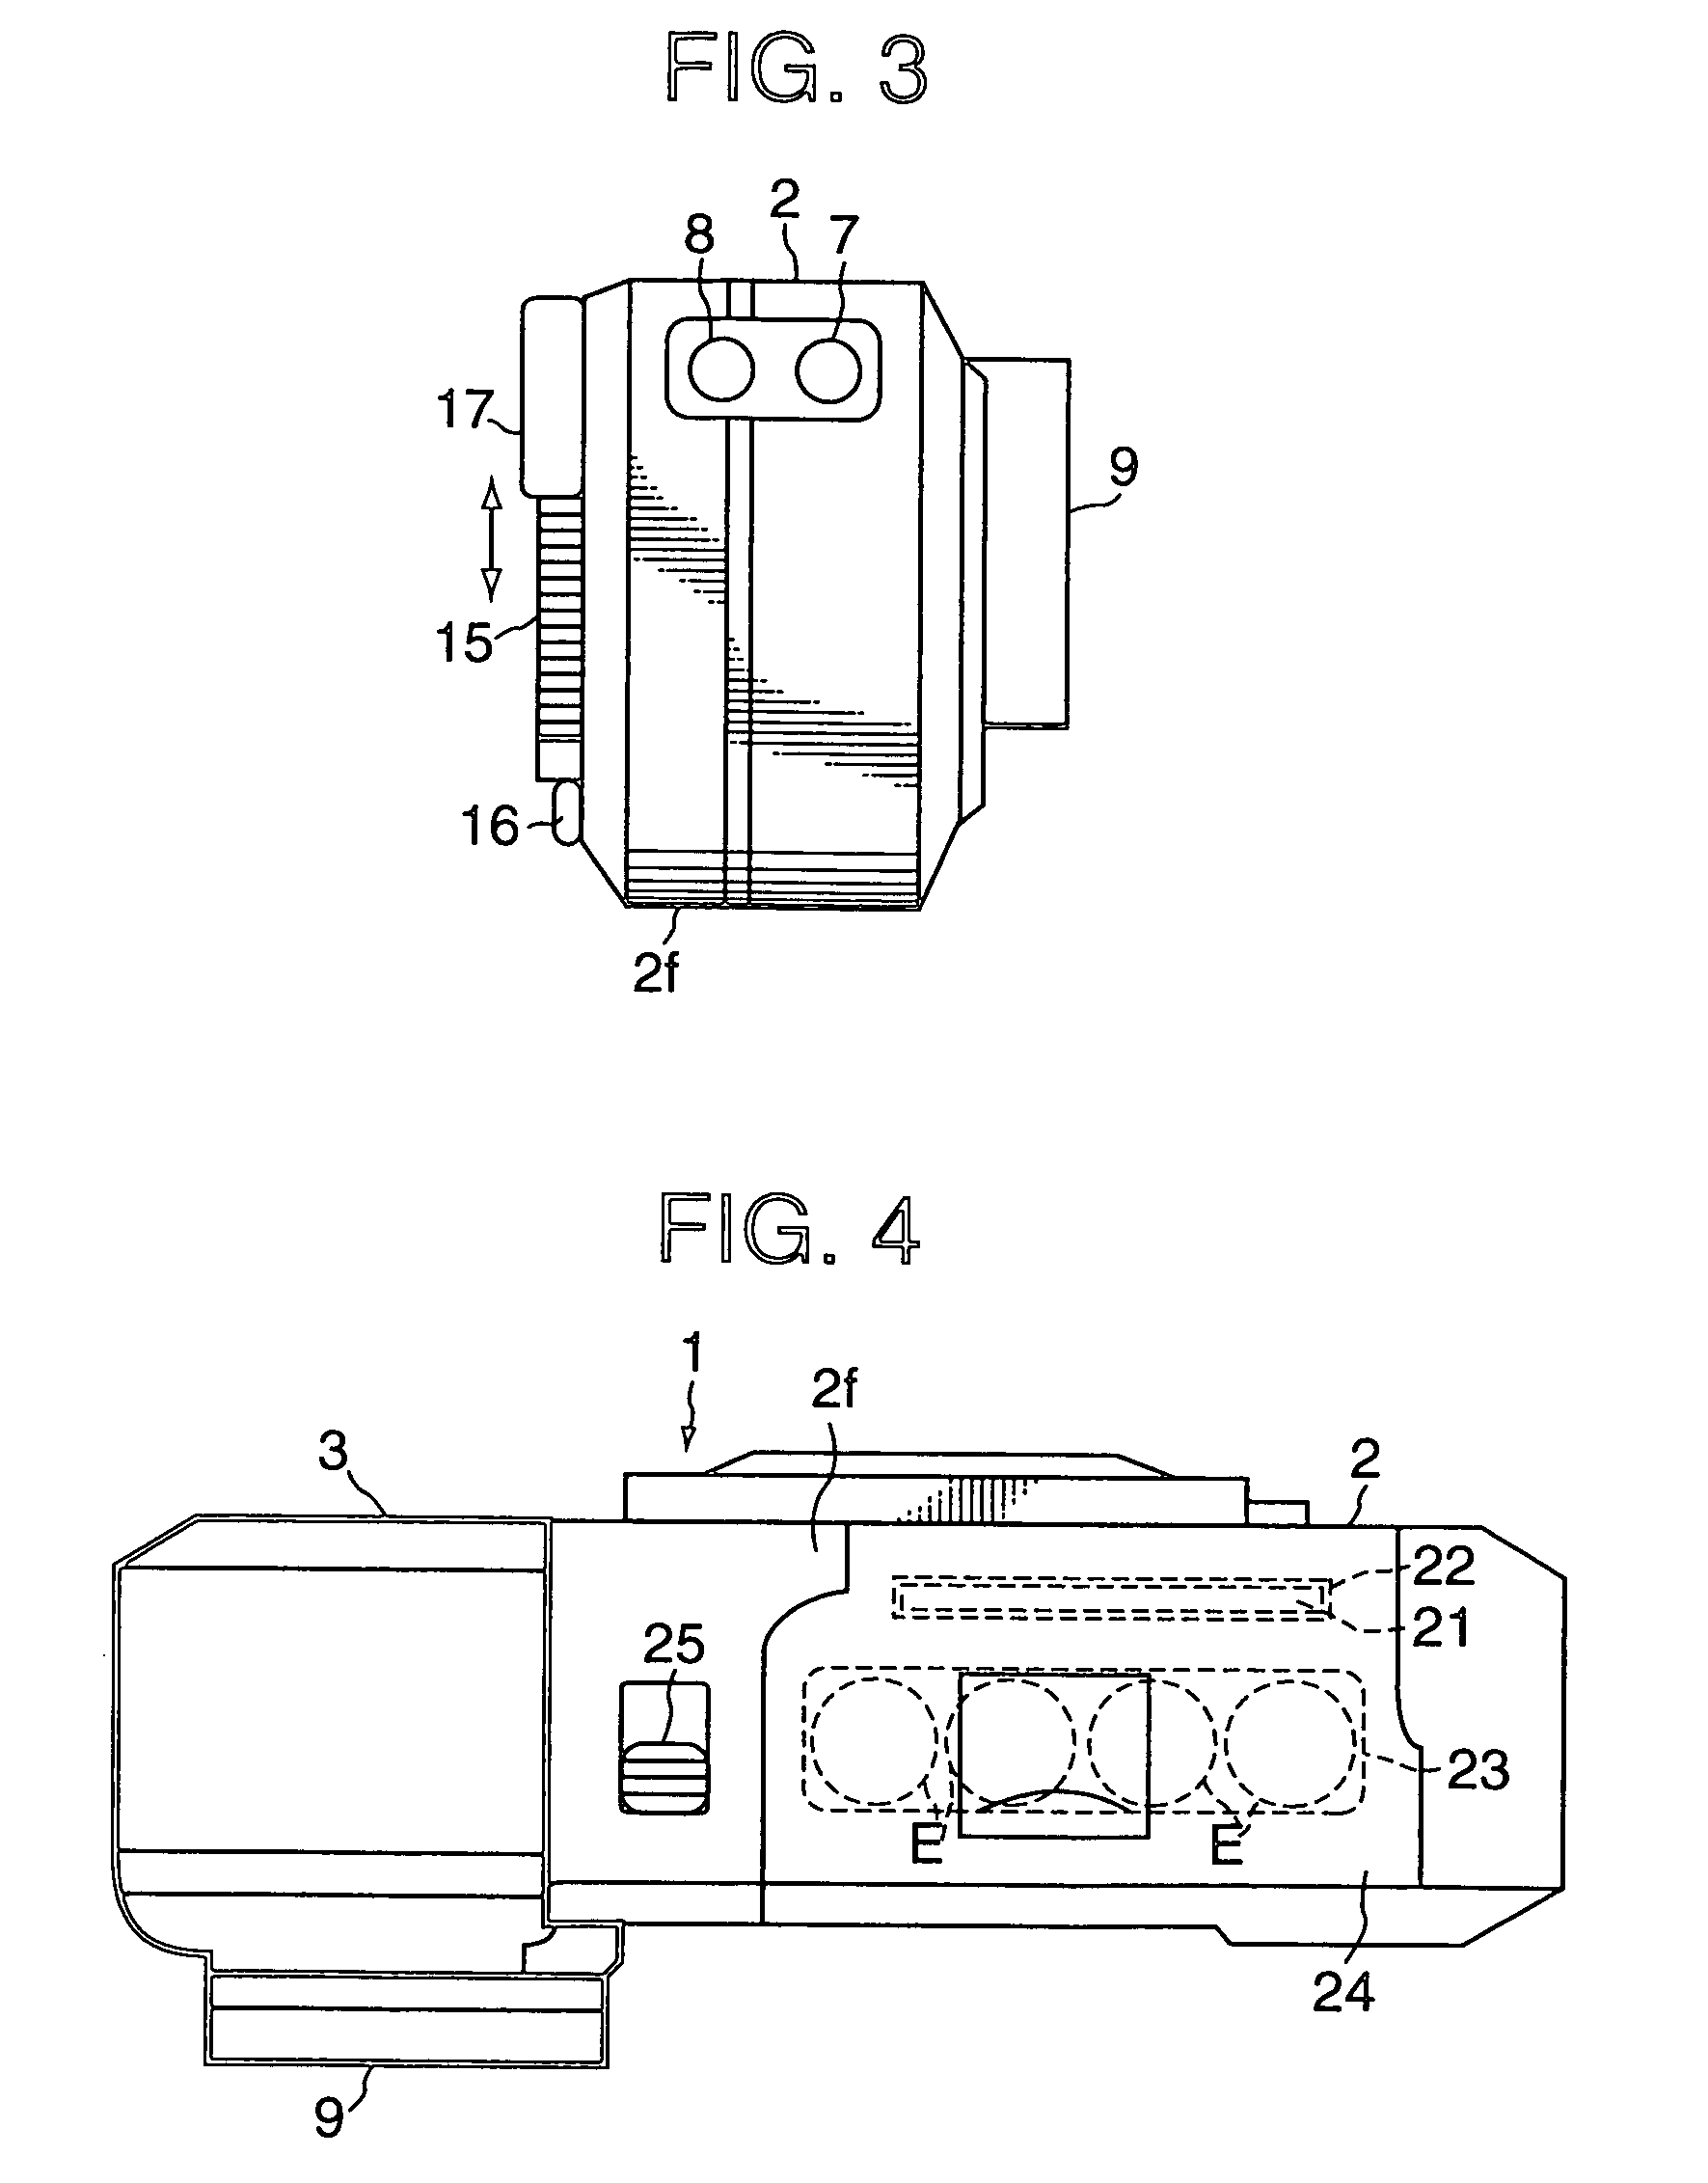 Image pickup apparatus including selective insertion of ND filter into taking lens optical path based on luminance of object to be imaged